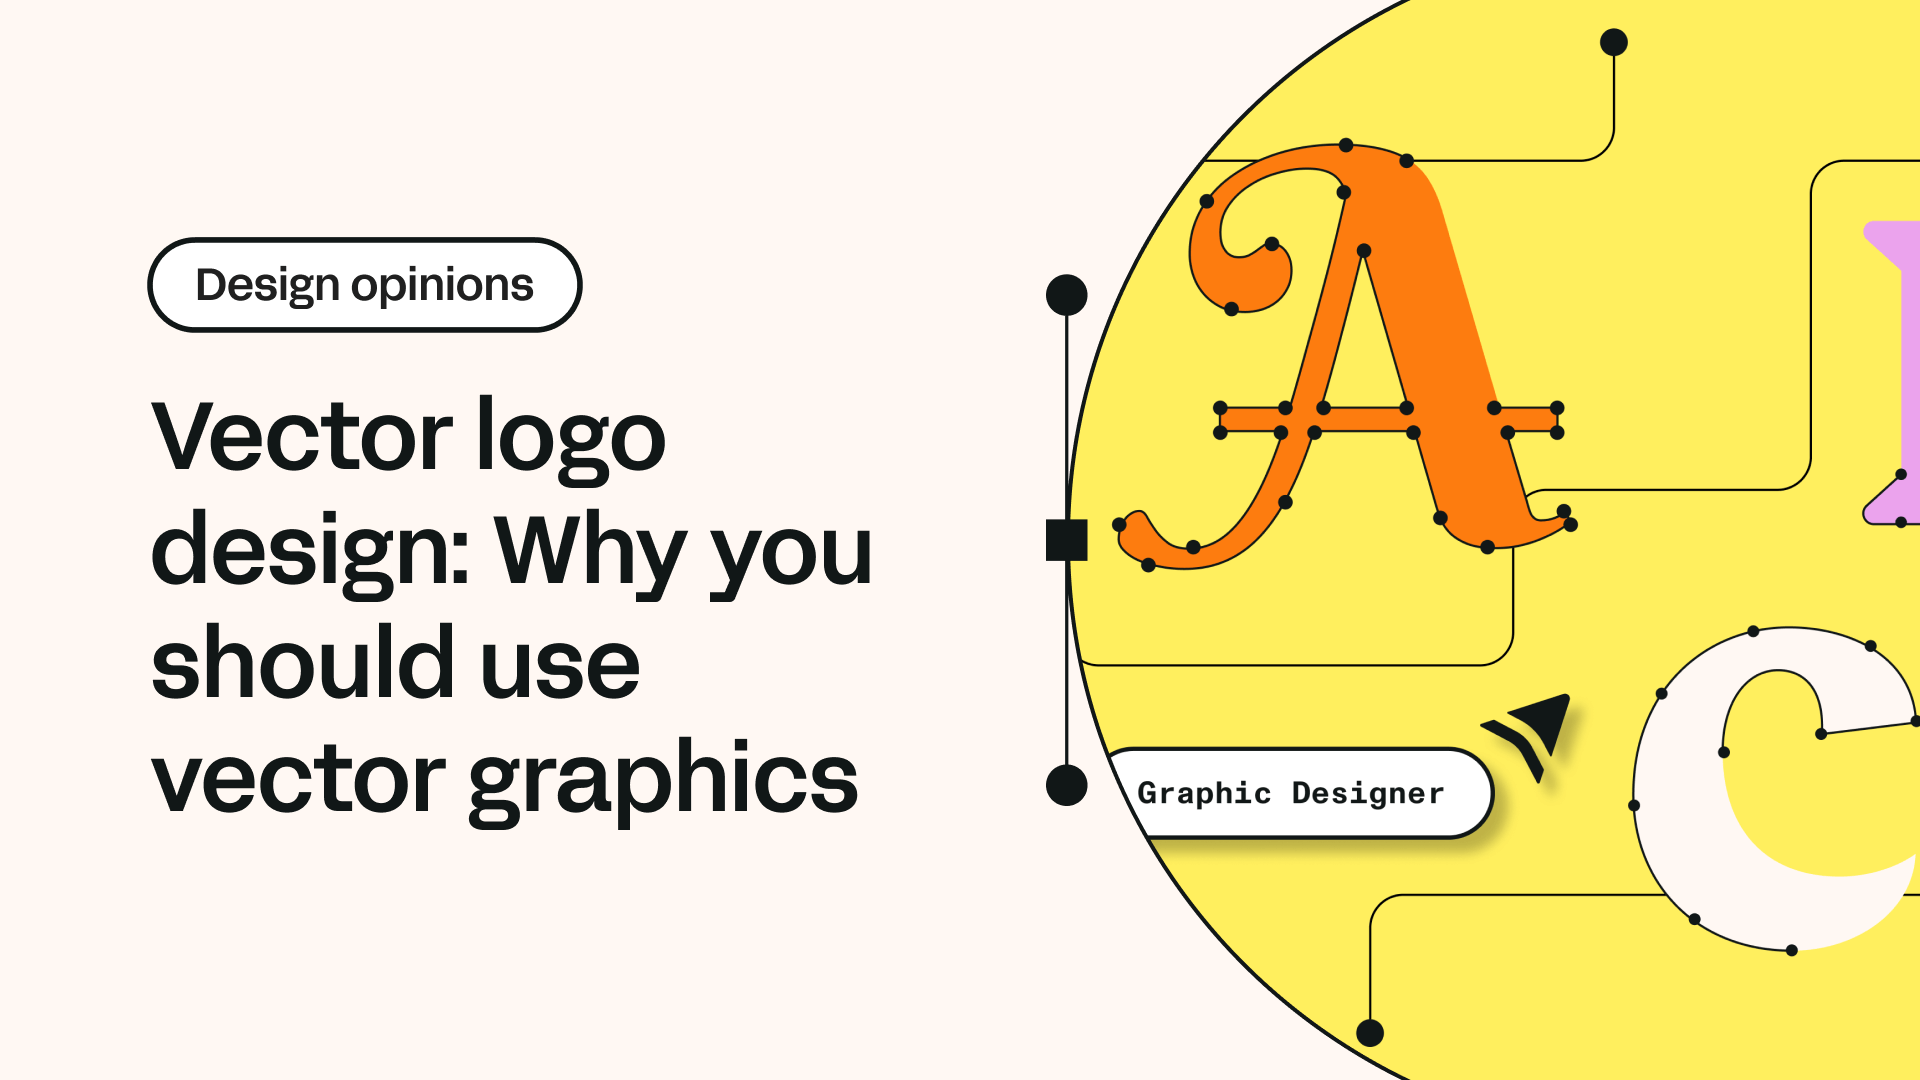 Vector logo design: Why you should use vector graphics